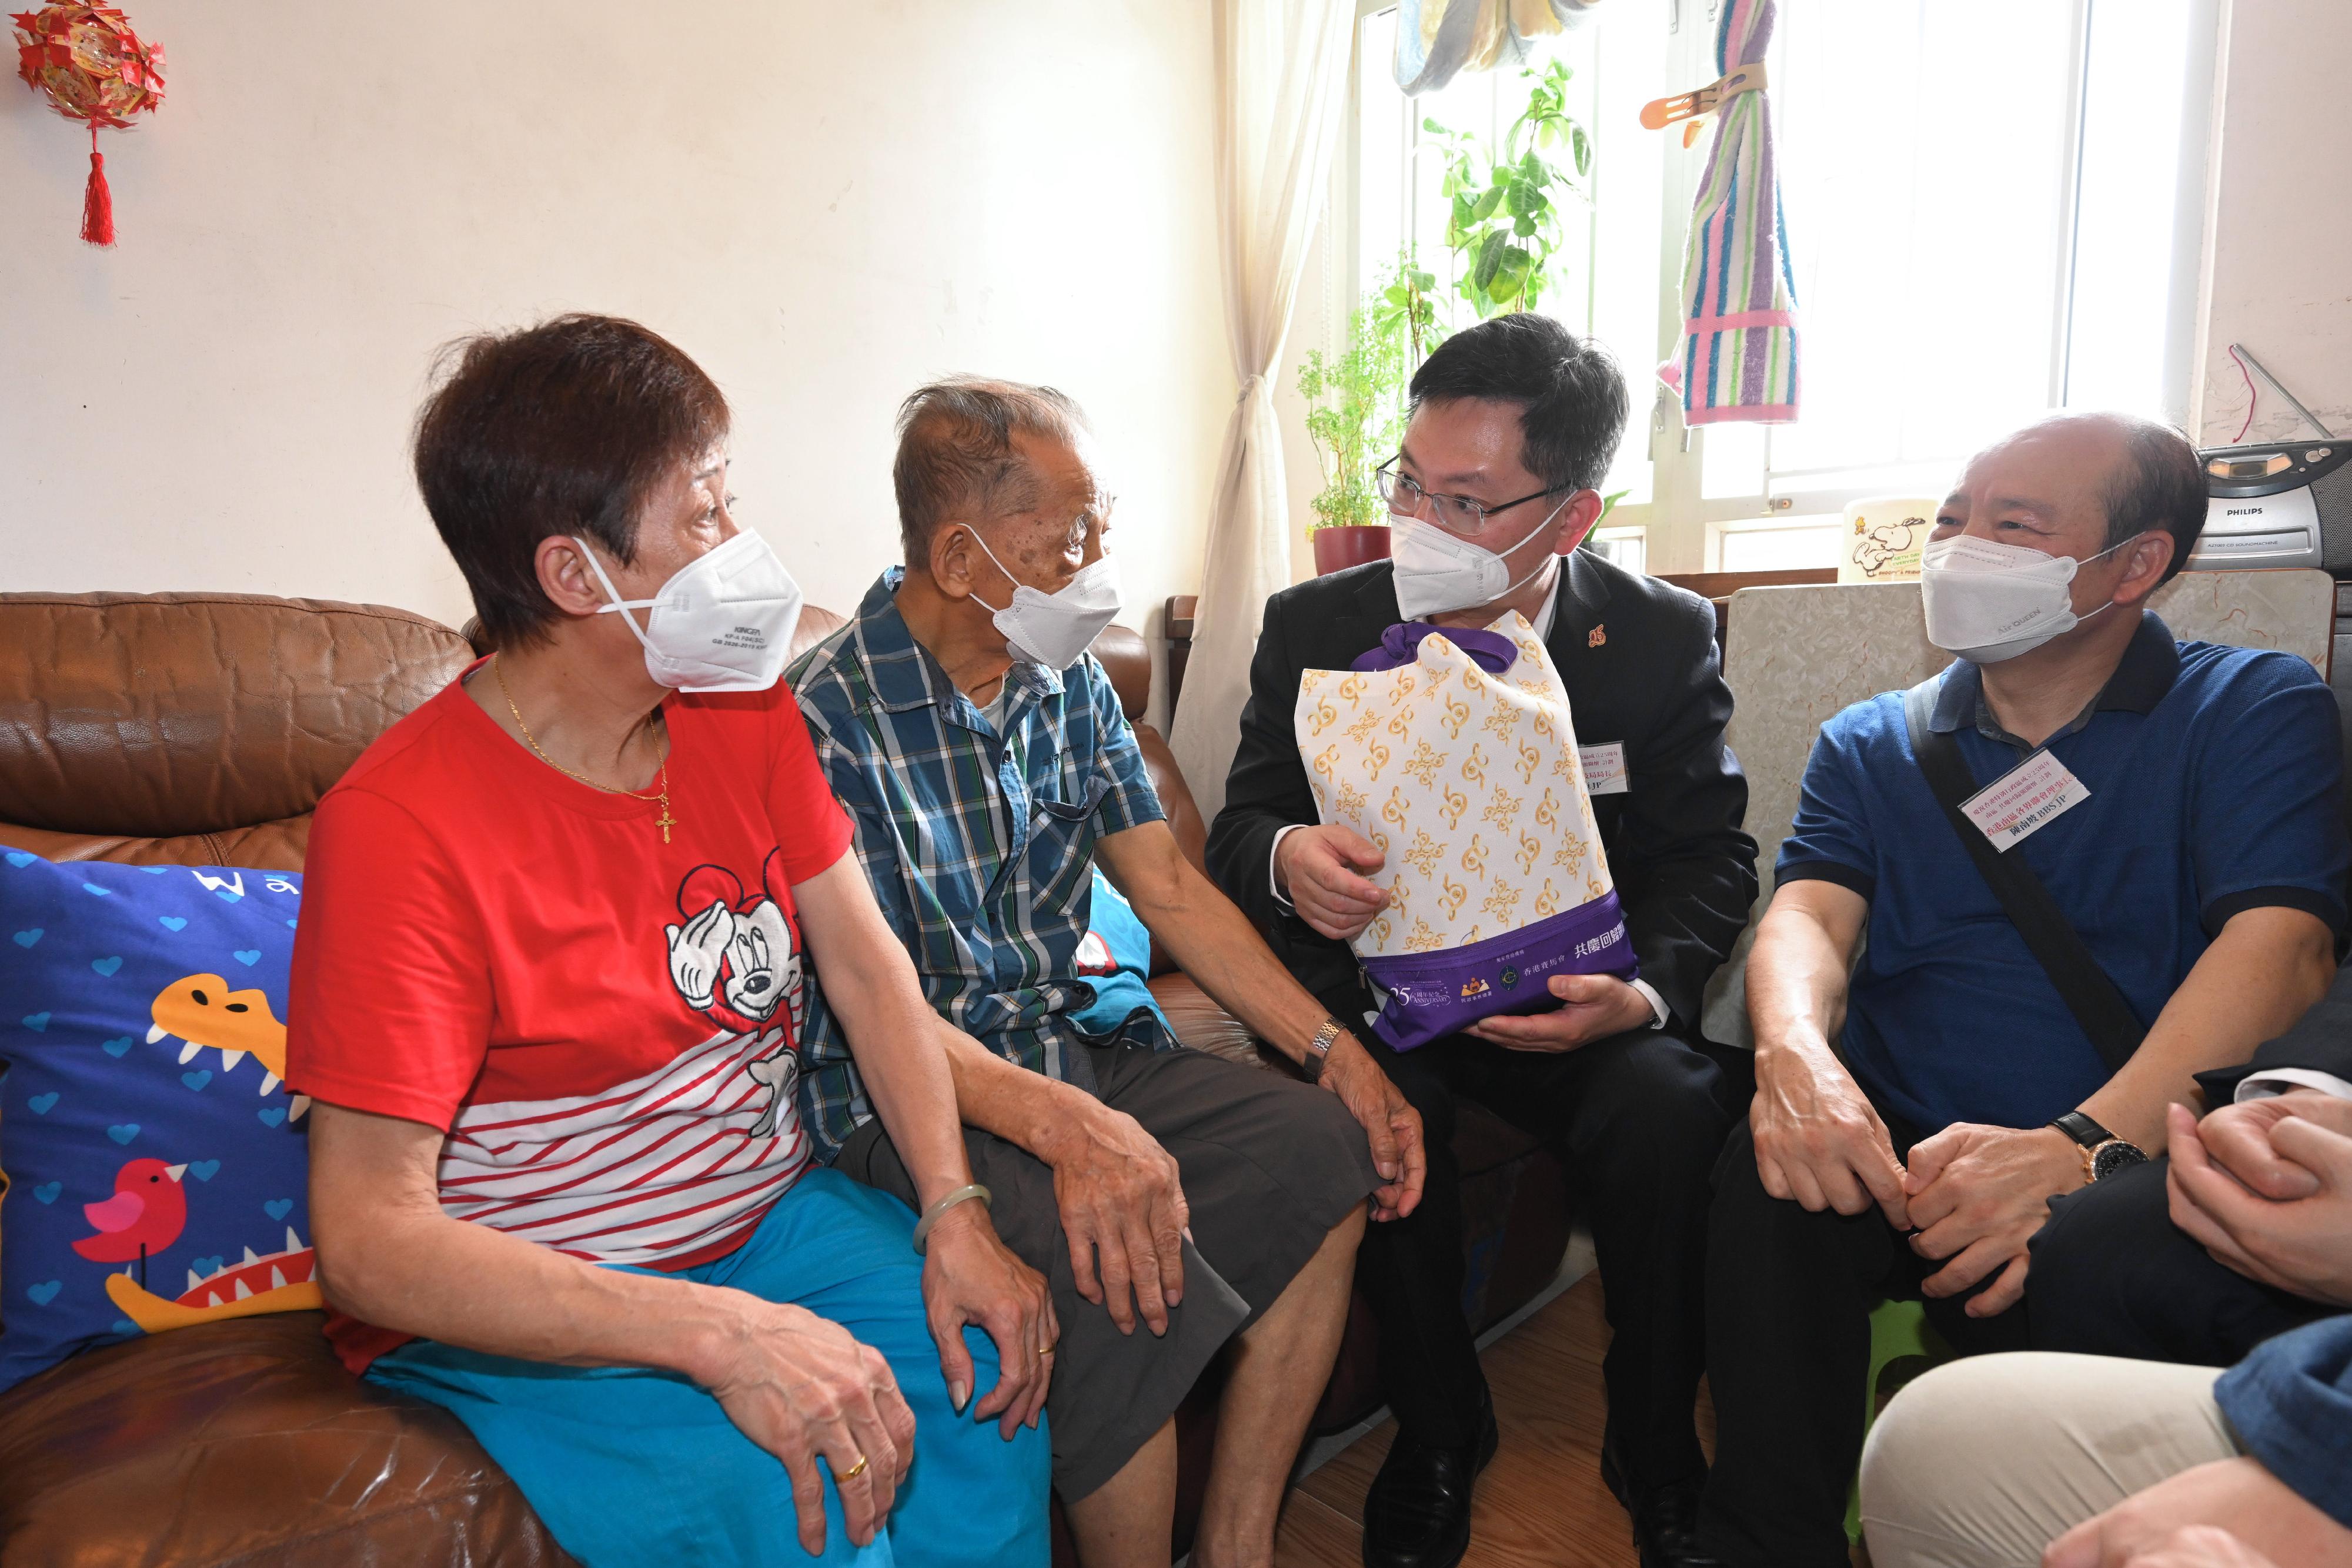 The Secretary for Innovation and Technology, Mr Alfred Sit (second right), visits an elderly doubleton household in Shek Pai Wan Estate today (June 16) and gives out a gift pack to show care and love in celebration of the 25th anniversary of the establishment of the Hong Kong Special Administrative Region. Looking on is the Chairman of the Hong Kong Southern District Community Association, Mr Chan Nam-po (first right).